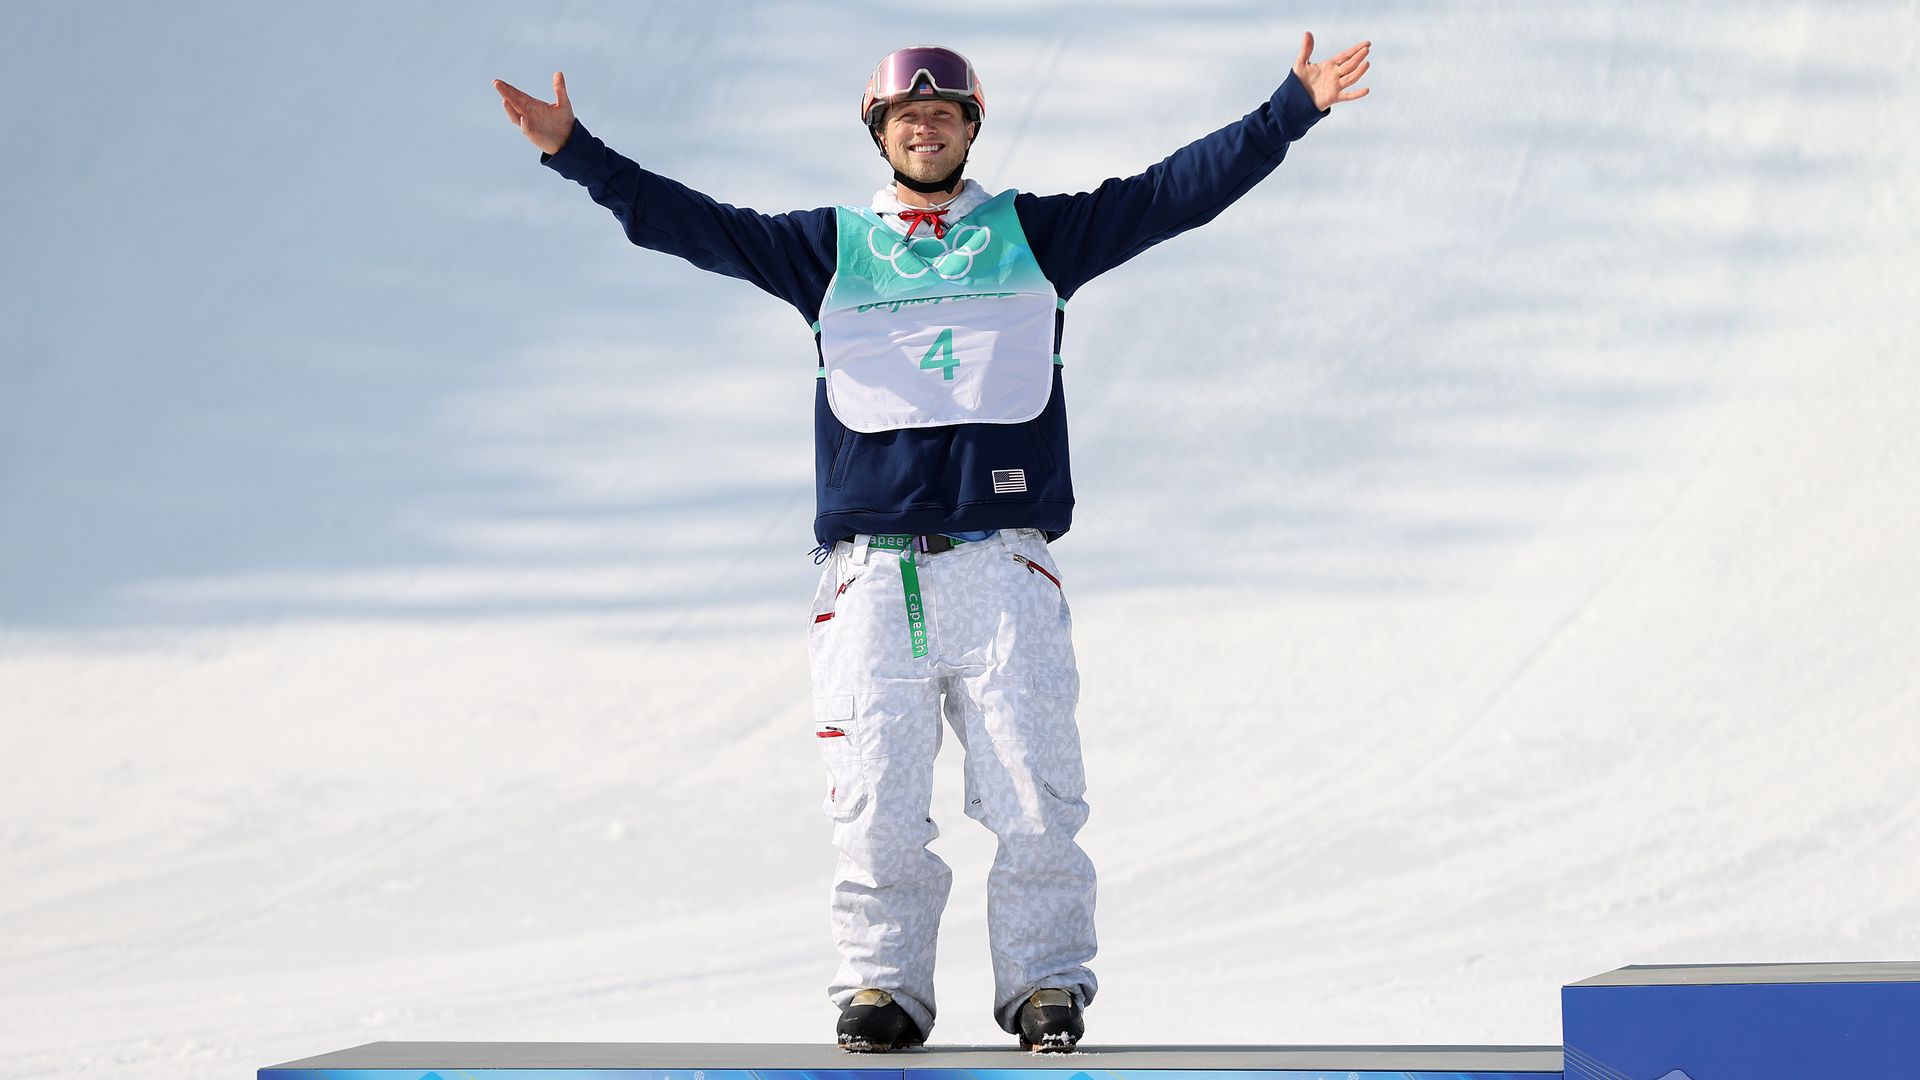 Silver medalist Colby Stevenson of Team United States celebrates during the Men's Freestyle Skiing Freeski Big Air Final flower ceremony on February 09, 2022 in Beijing, China